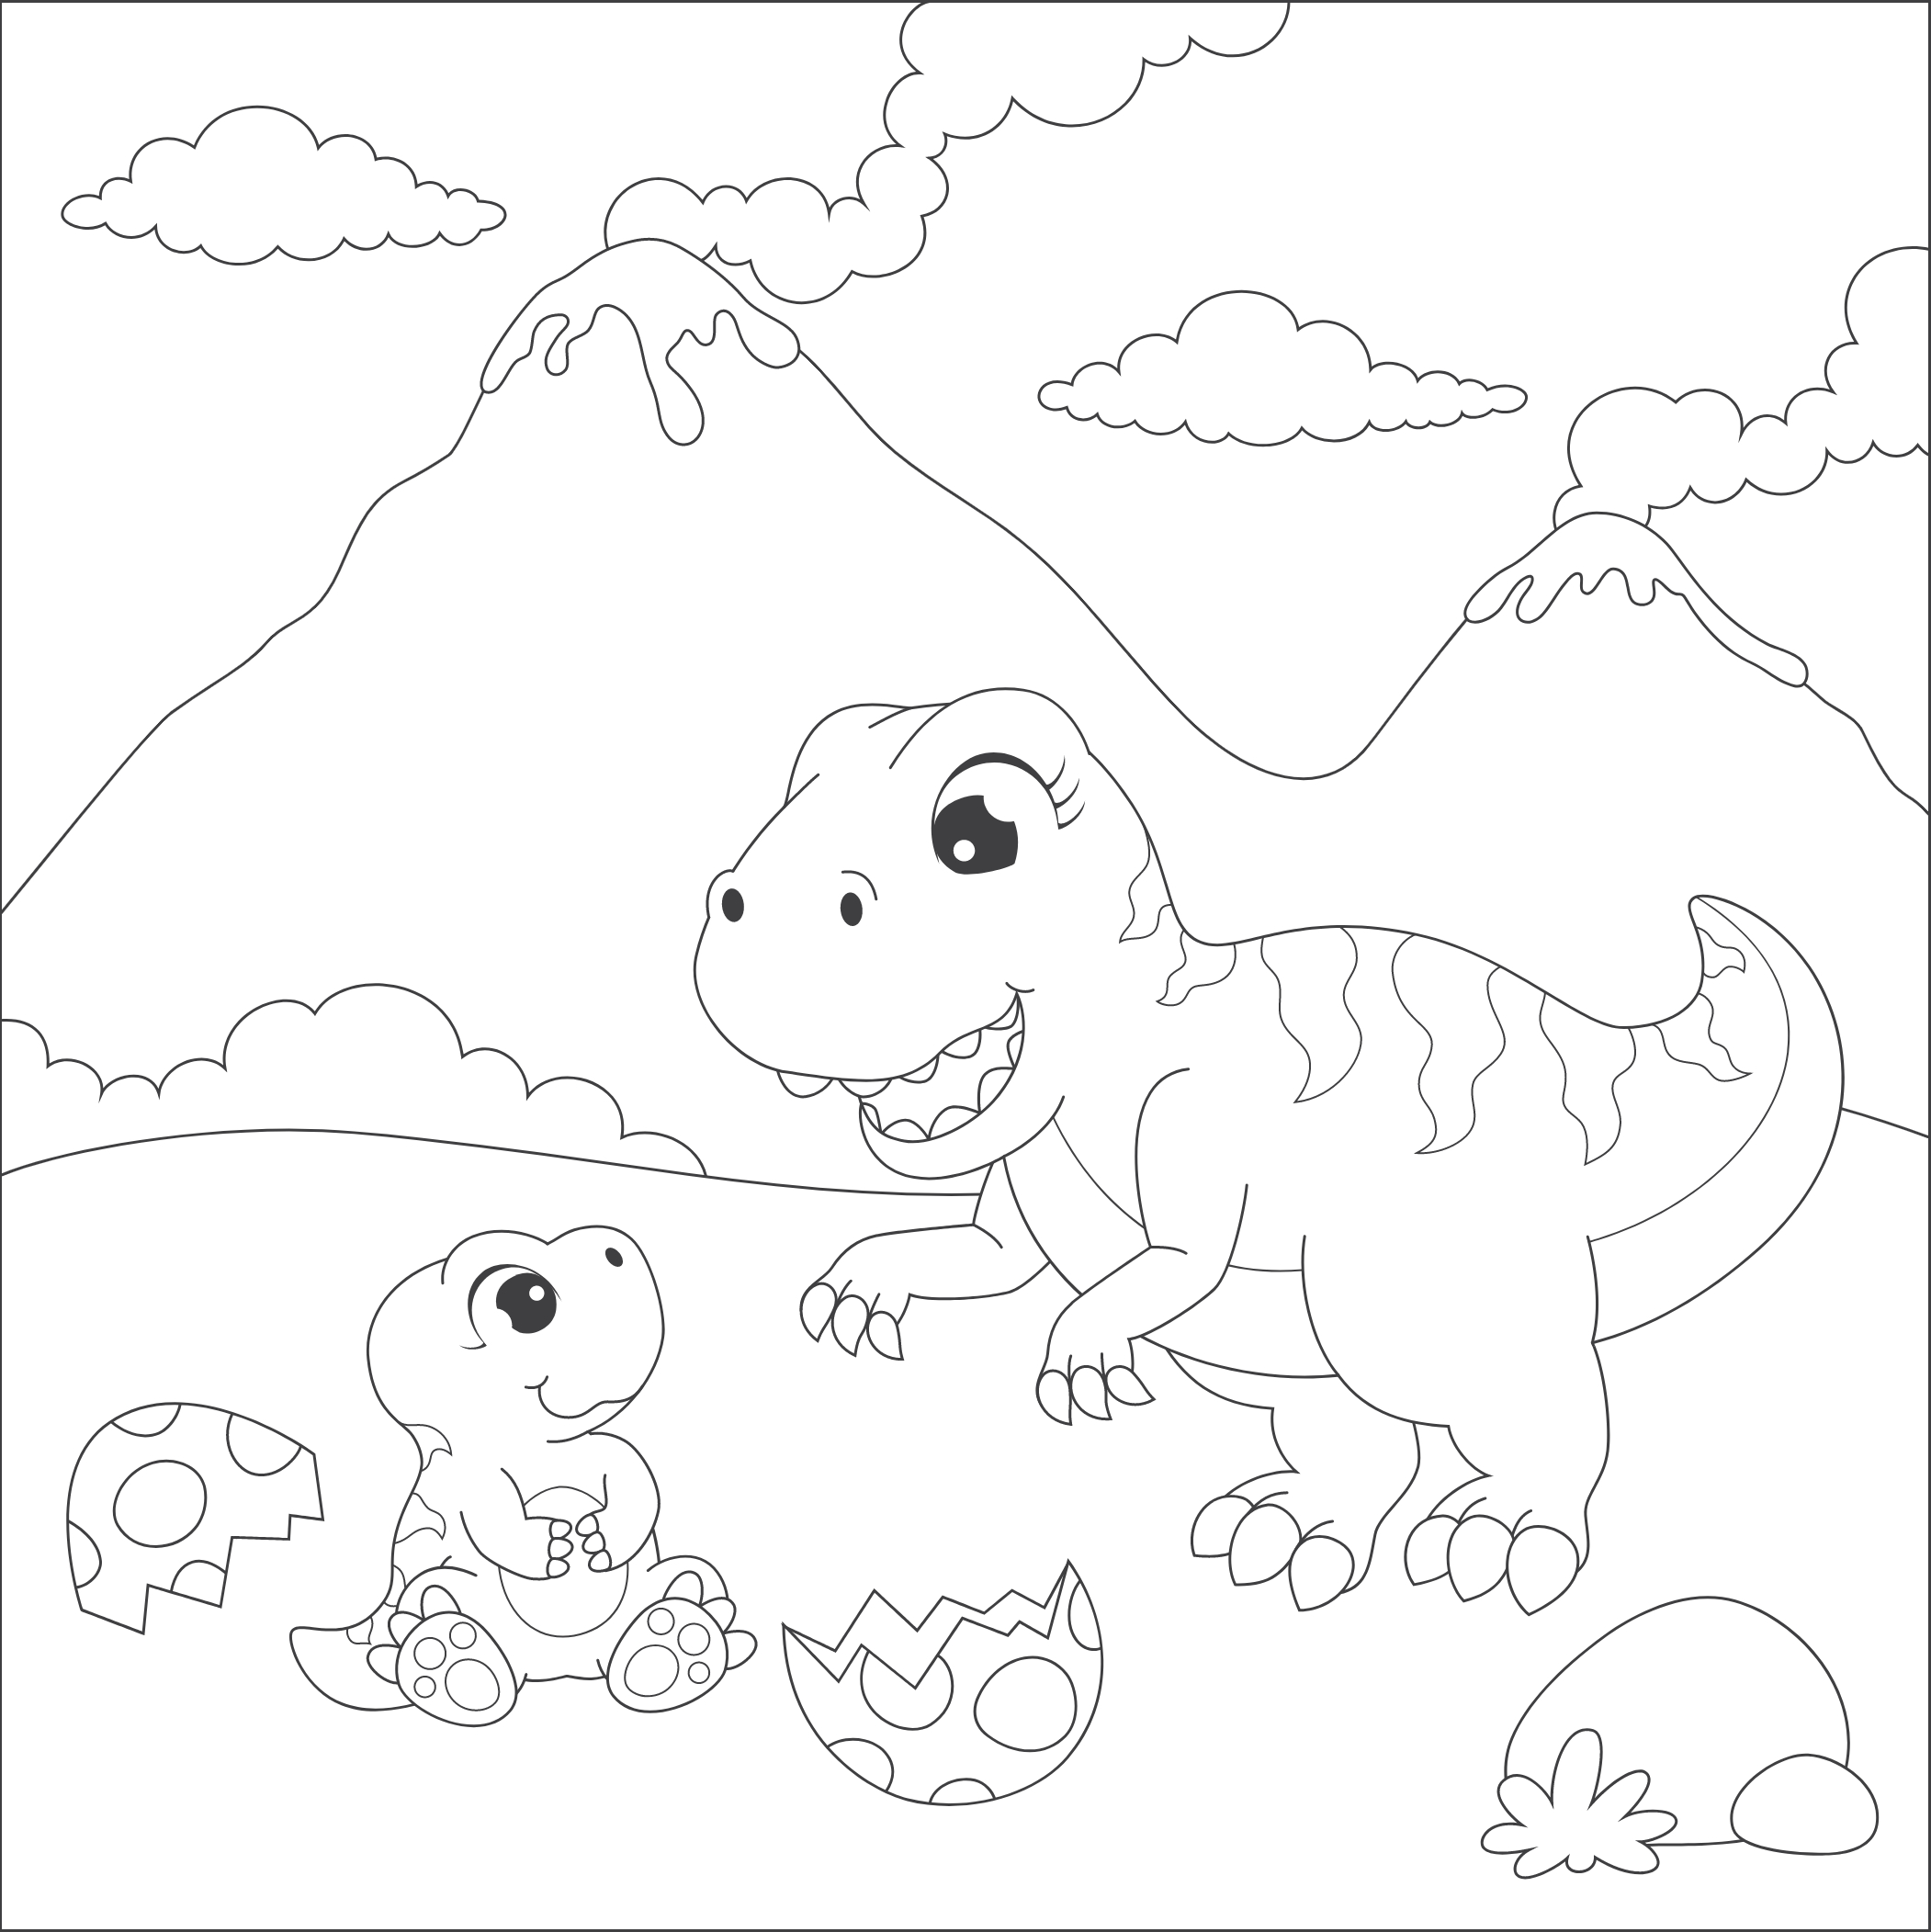 Tyrannosaurus rex in front of a volcano coloring page